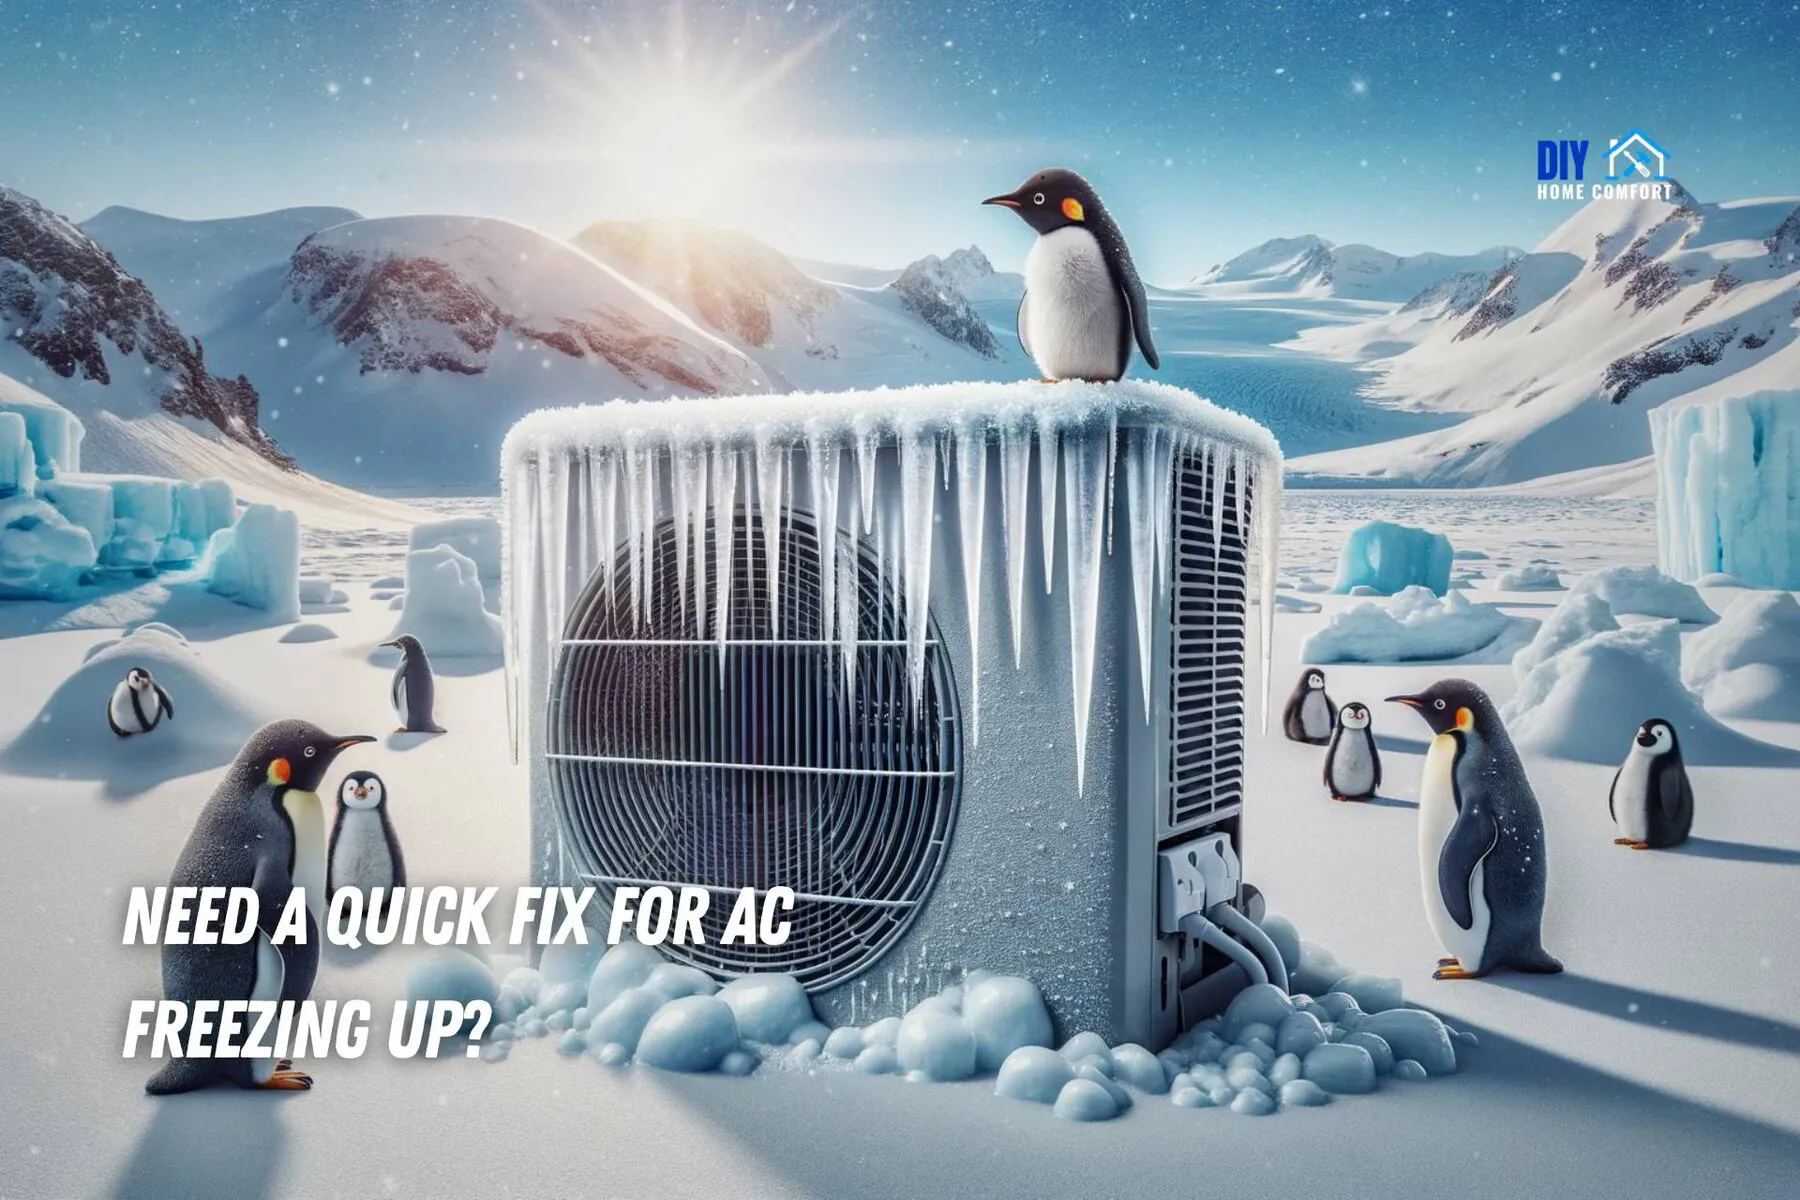 Need a Quick Fix for AC Freezing Up? We Got You! | DIY Home Comfort